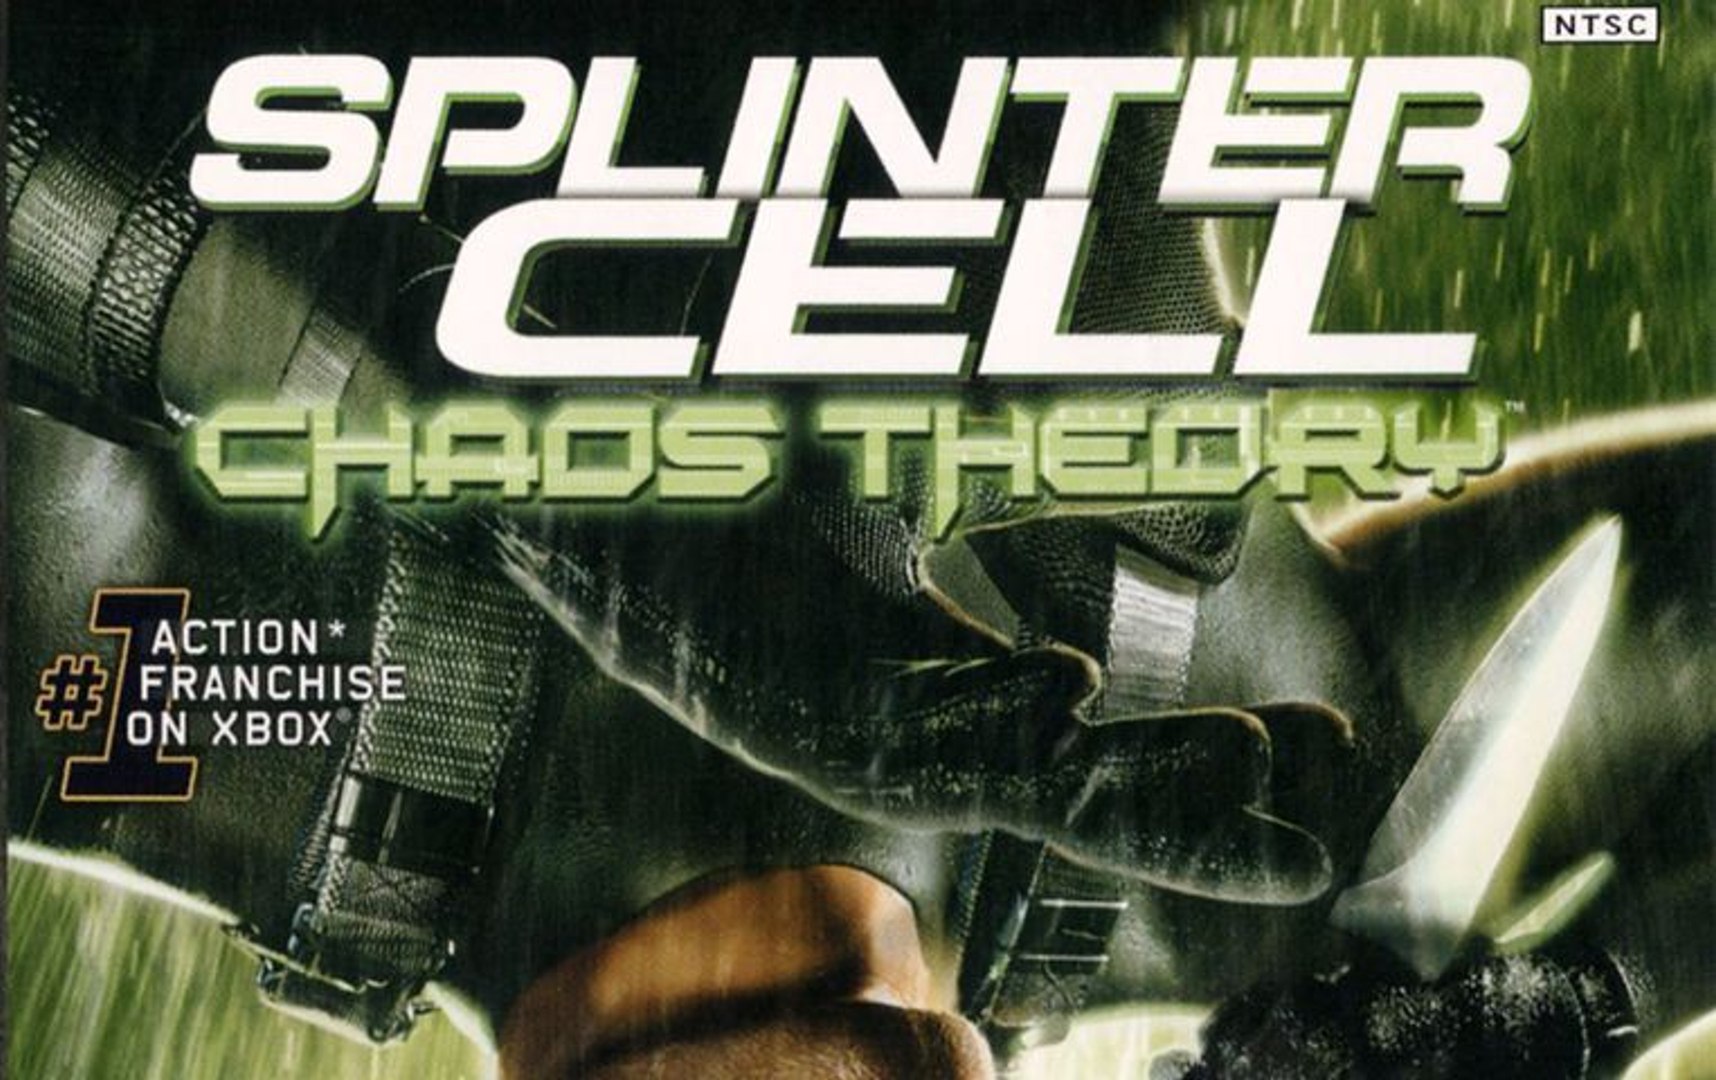 Tom Clancys Splinter Cell Chaos Theory Gameplay Played on X360 – Видео  Dailymotion